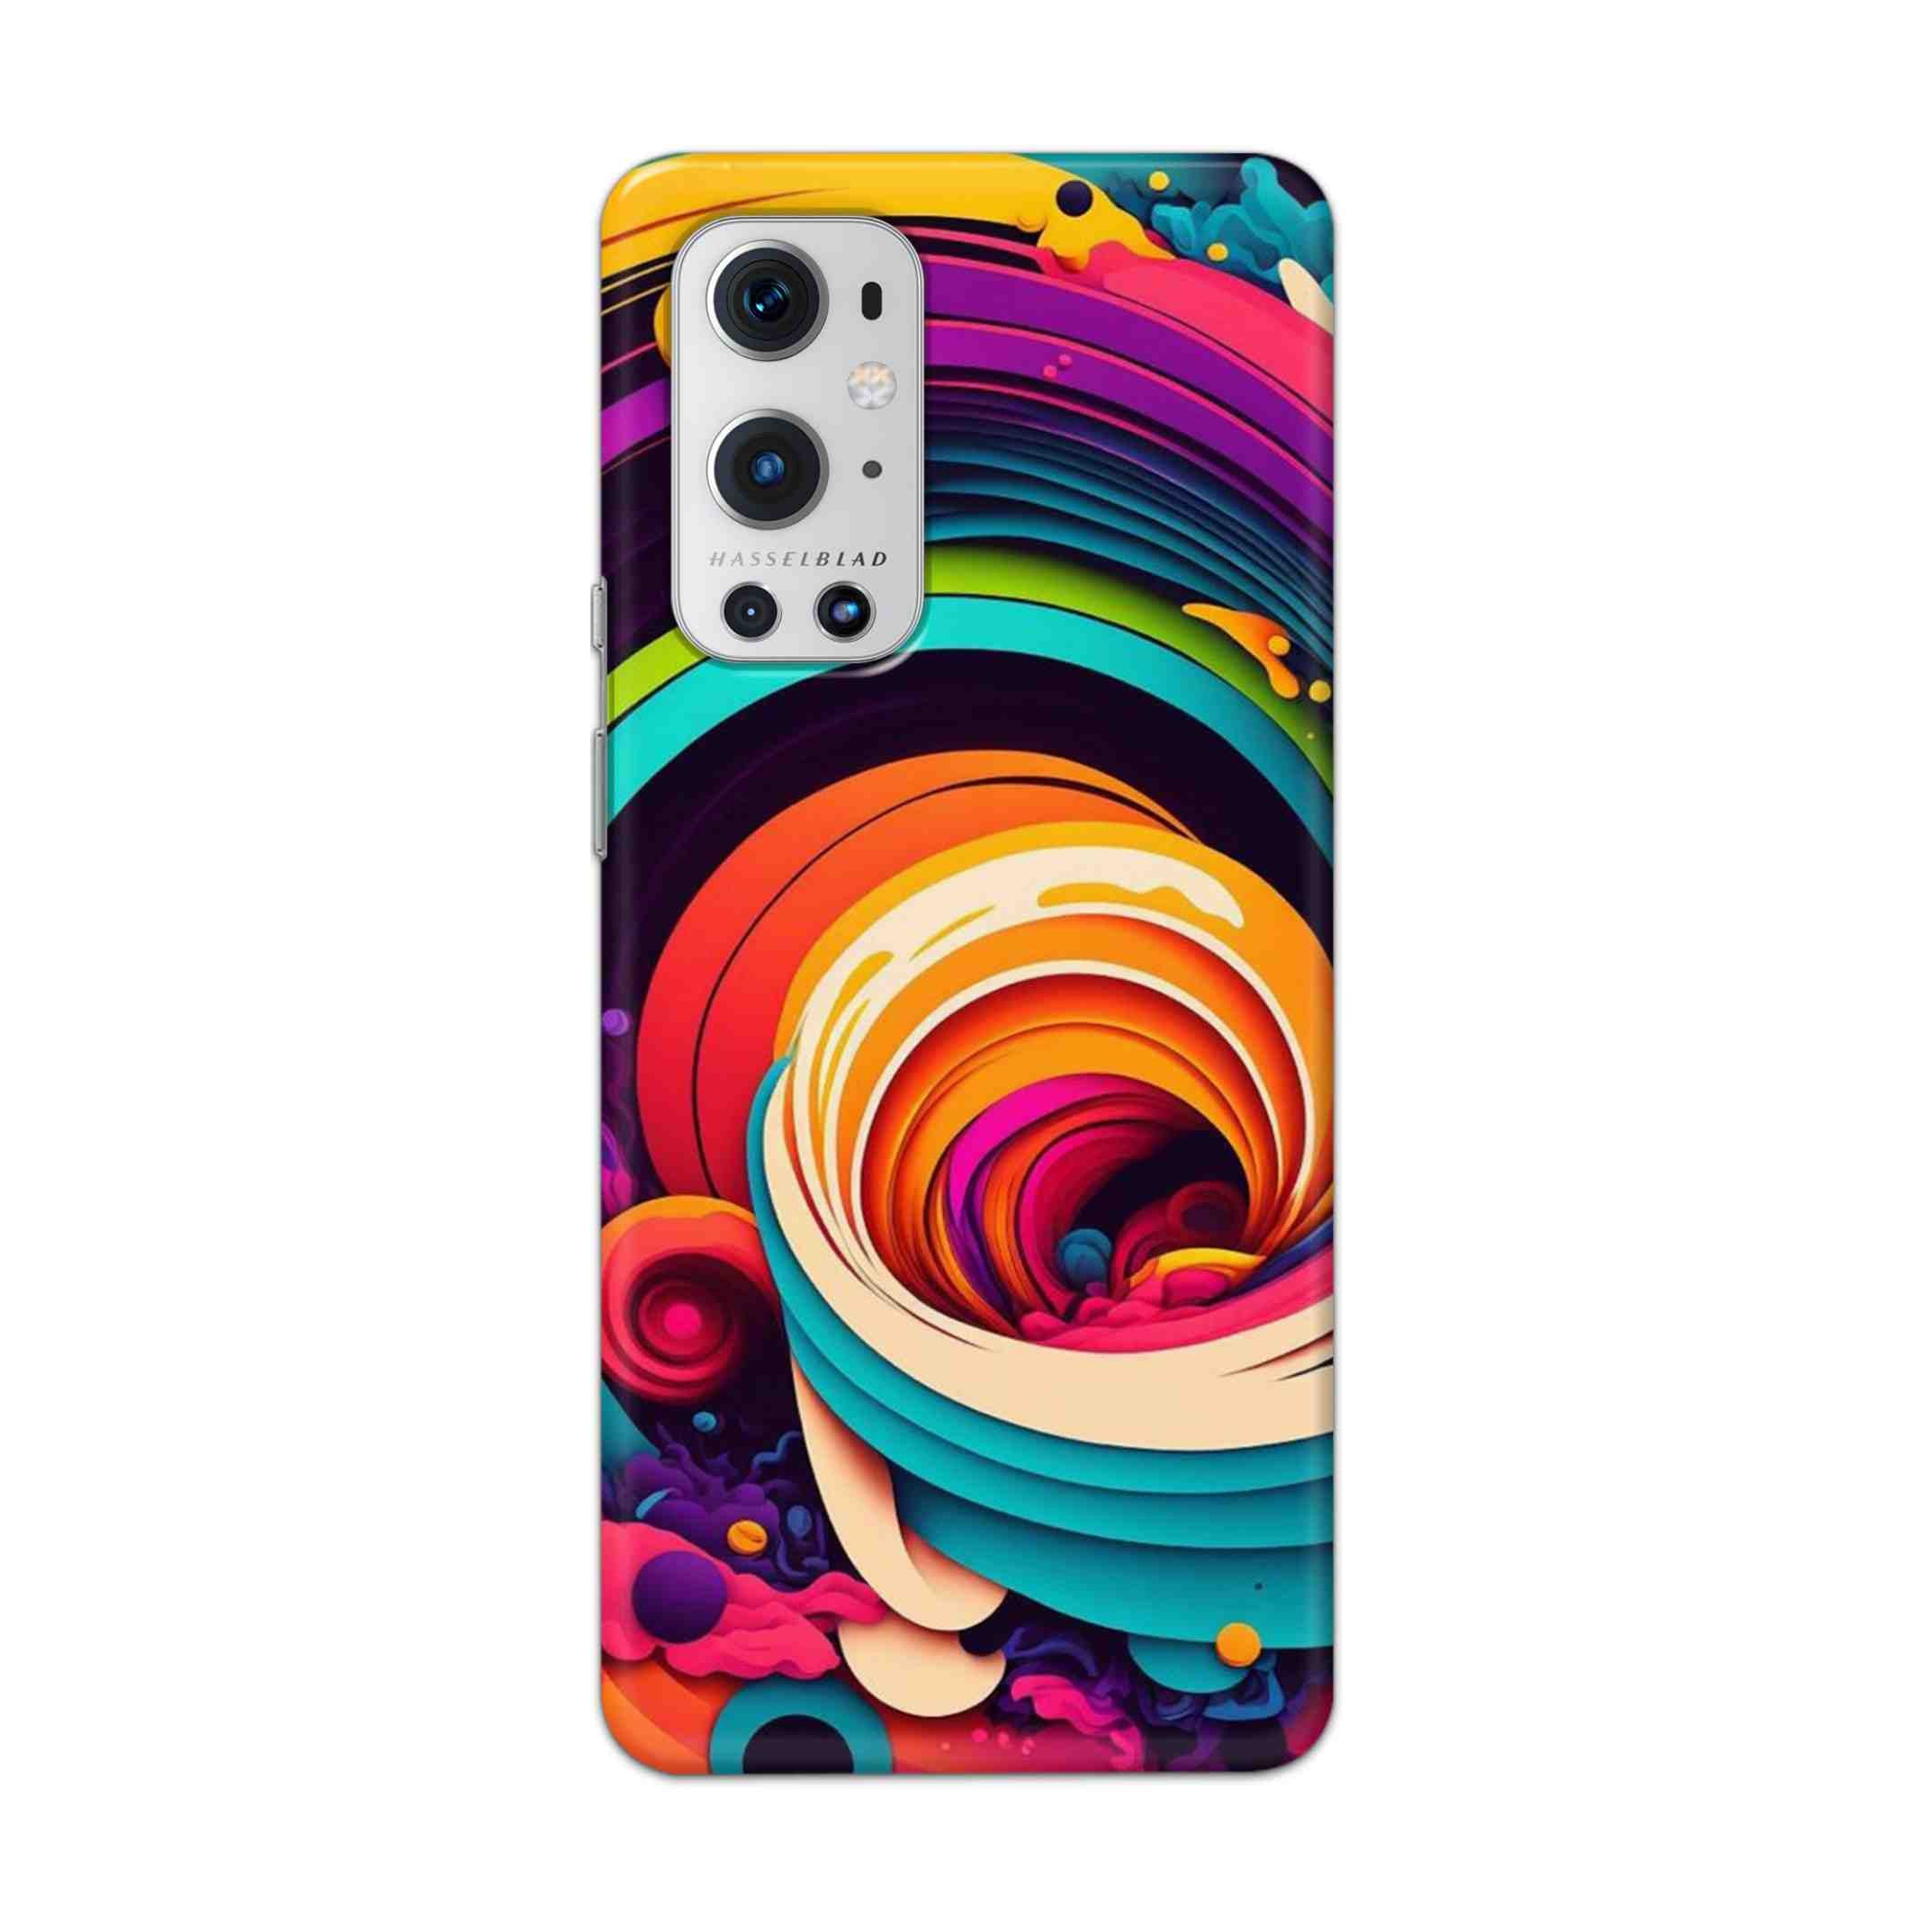 Buy Colour Circle Hard Back Mobile Phone Case Cover For OnePlus 9 Pro Online